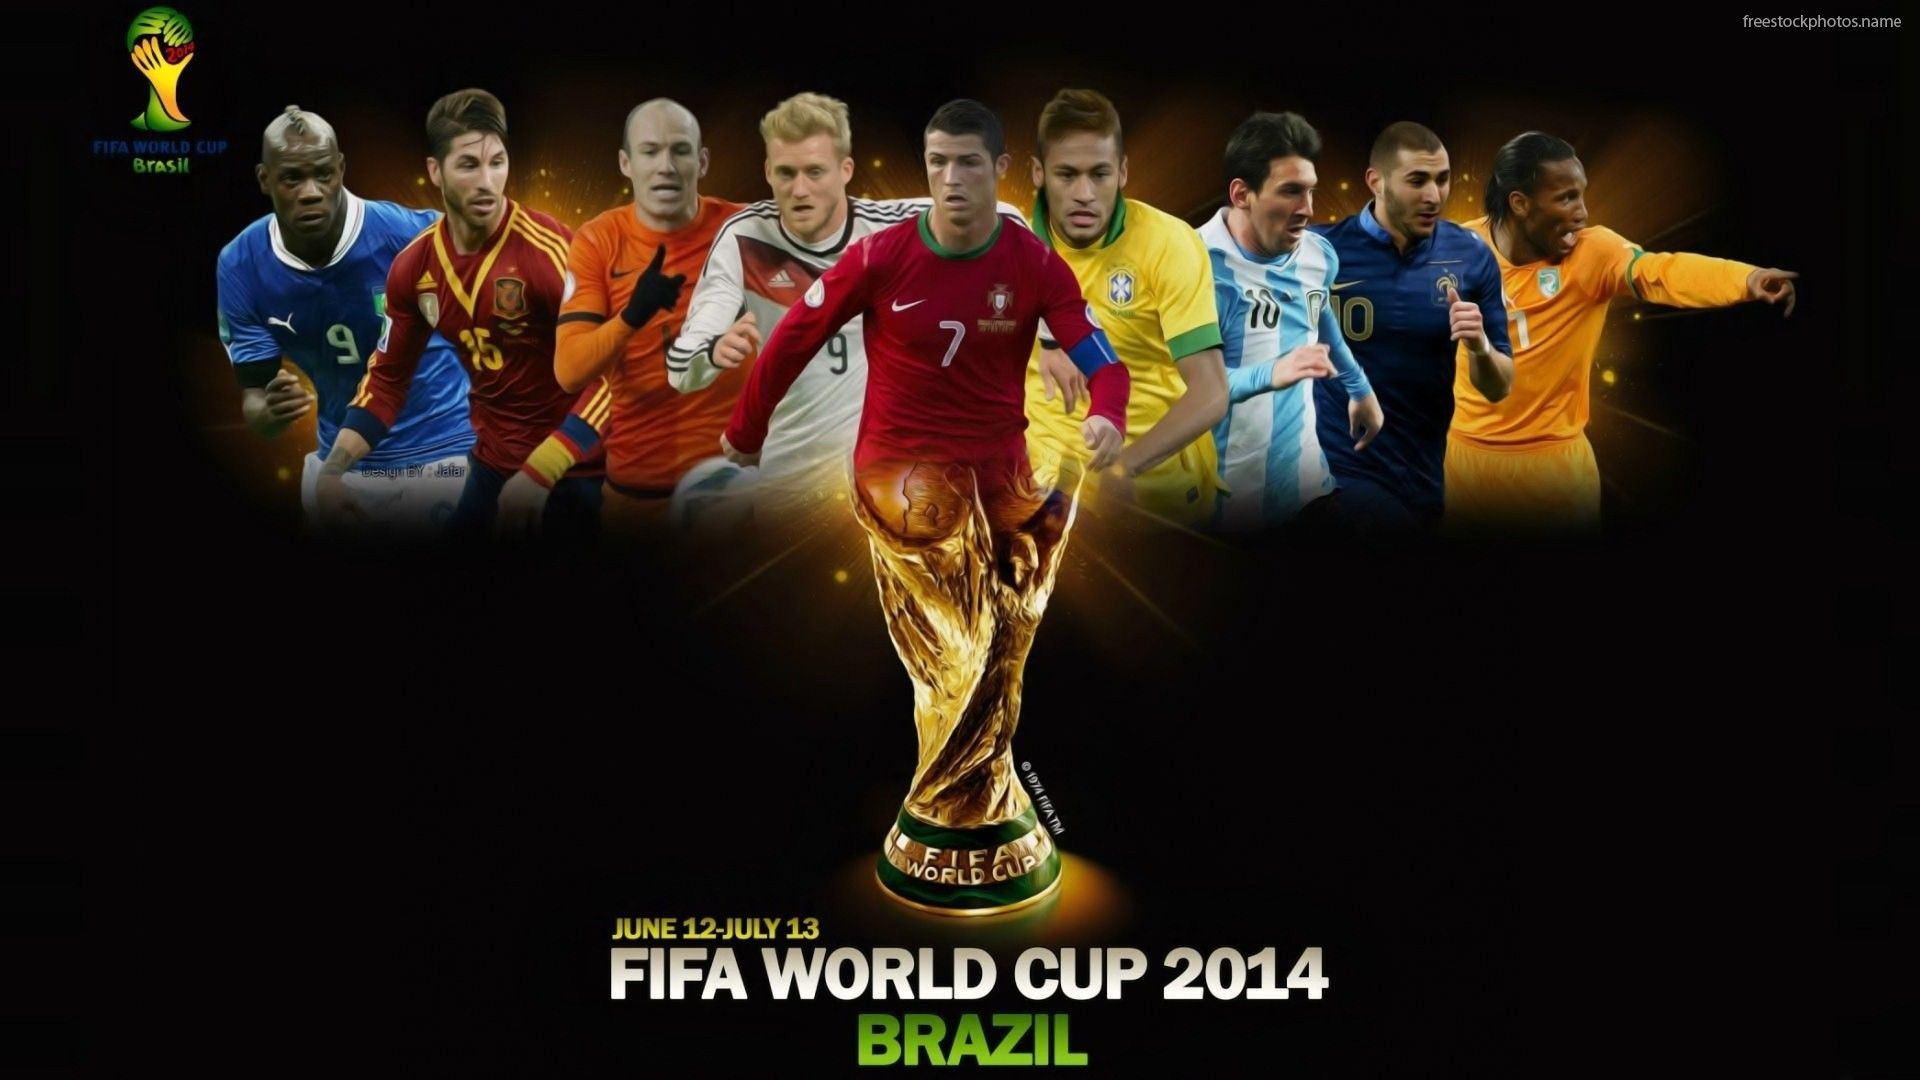 Wallpaper Of Soccer Players